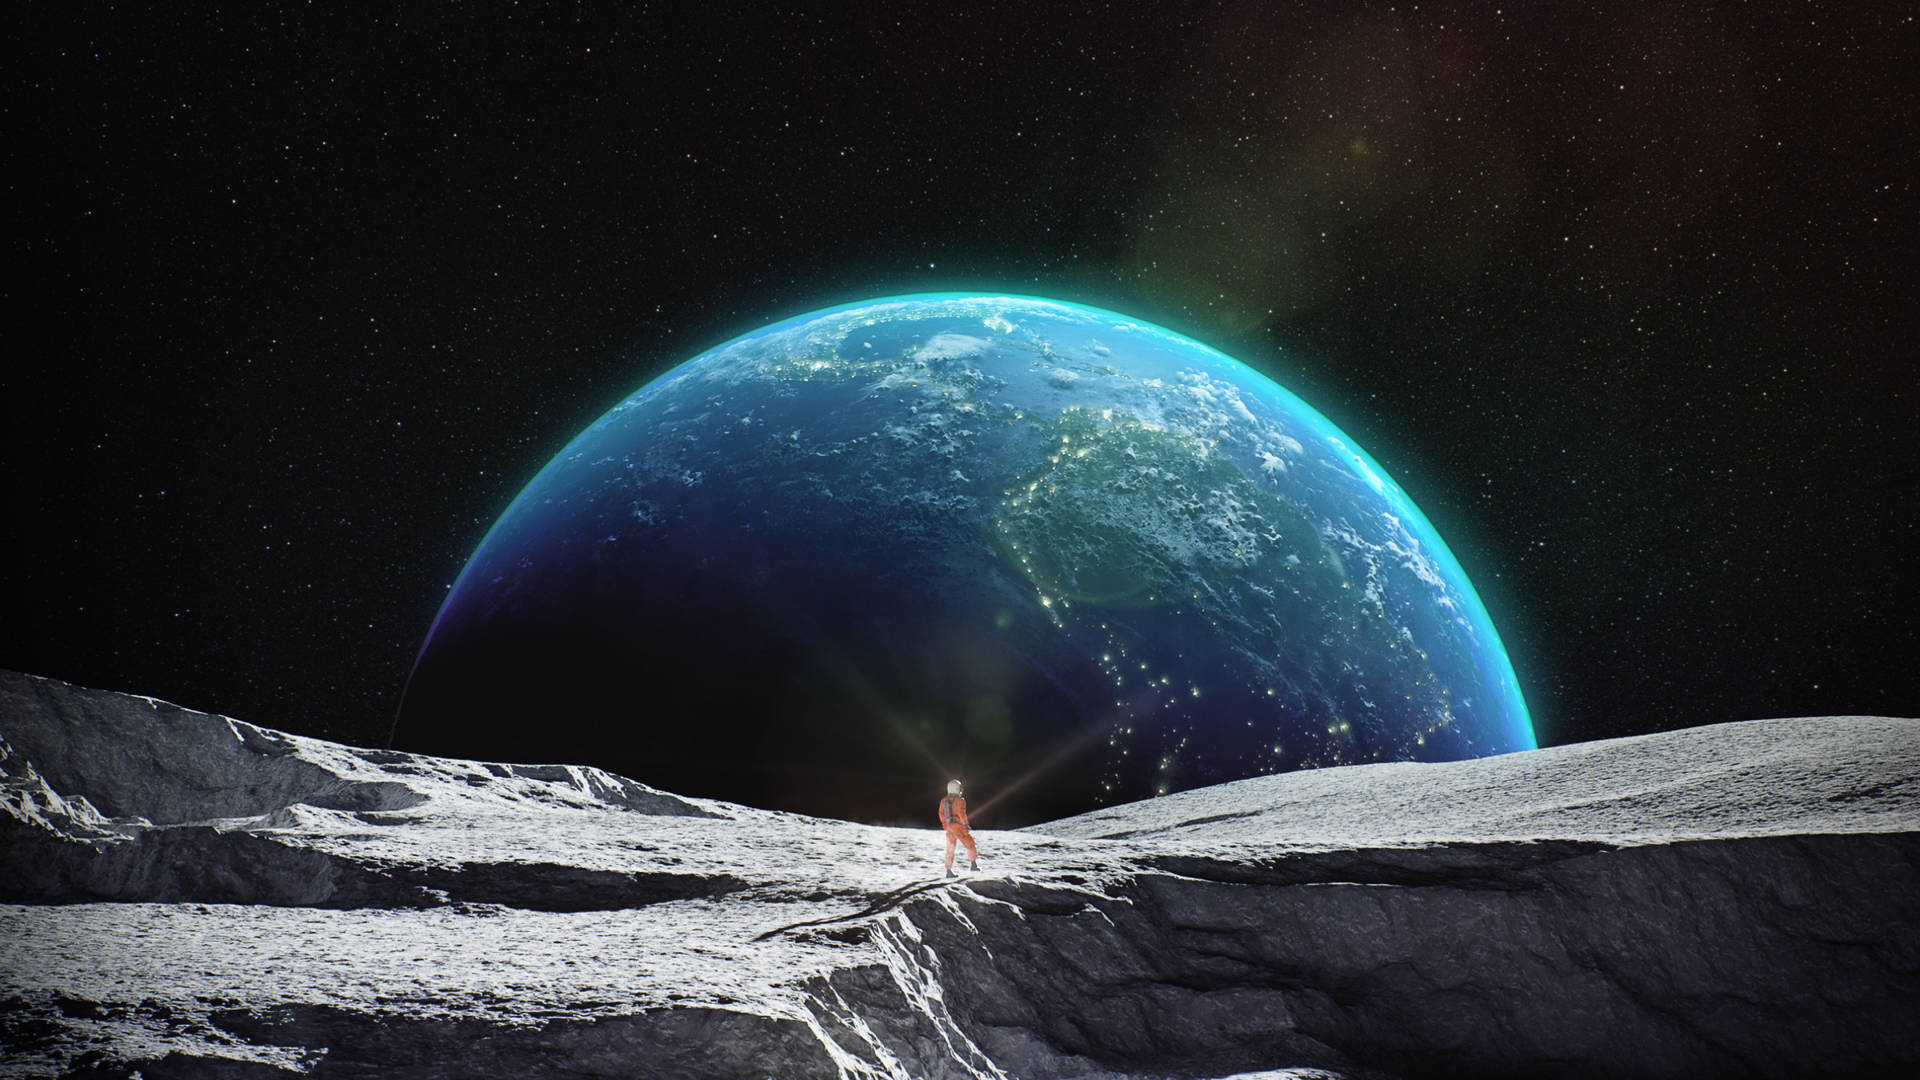 Moon 4k Astronaut Viewing Earth Background